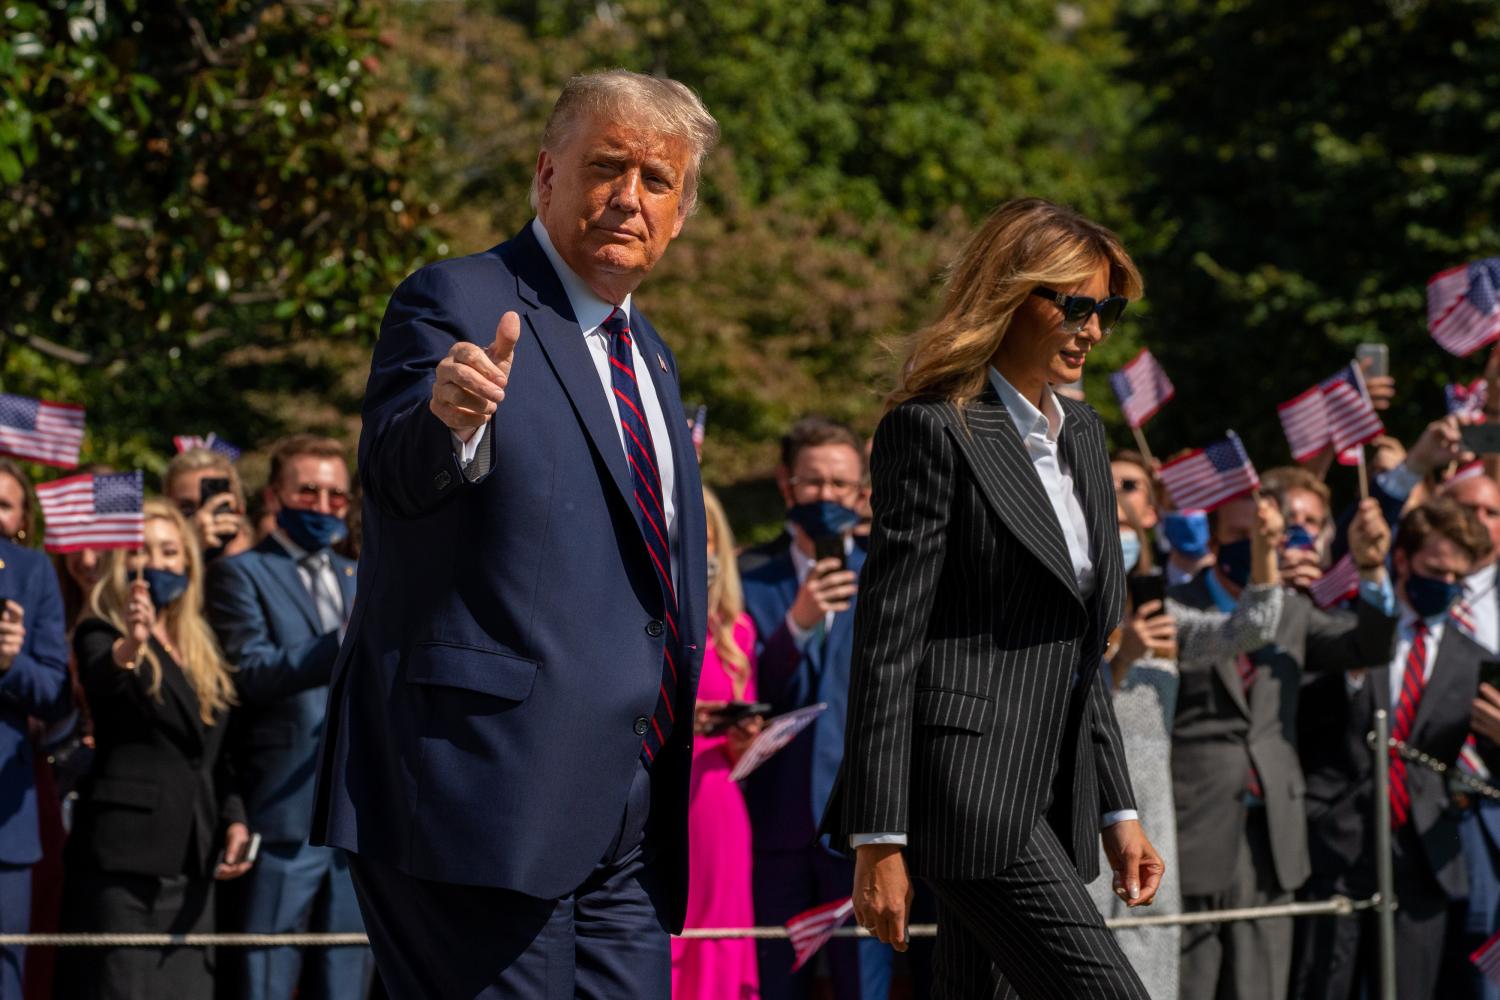 President Donald Trump and First Lady Melania Trump have tested positive for coronavirus (COVID-19), it was announced shortly after midnight on Friday, October 2, 2020.   They are seen leaving the White House to attend the first presidential debate in Cleveland, Ohio on Tuesday, September 29, 2020.     Photo by Ken Cedeno/Pool/Sipa USANo Use UK. No Use Germany.